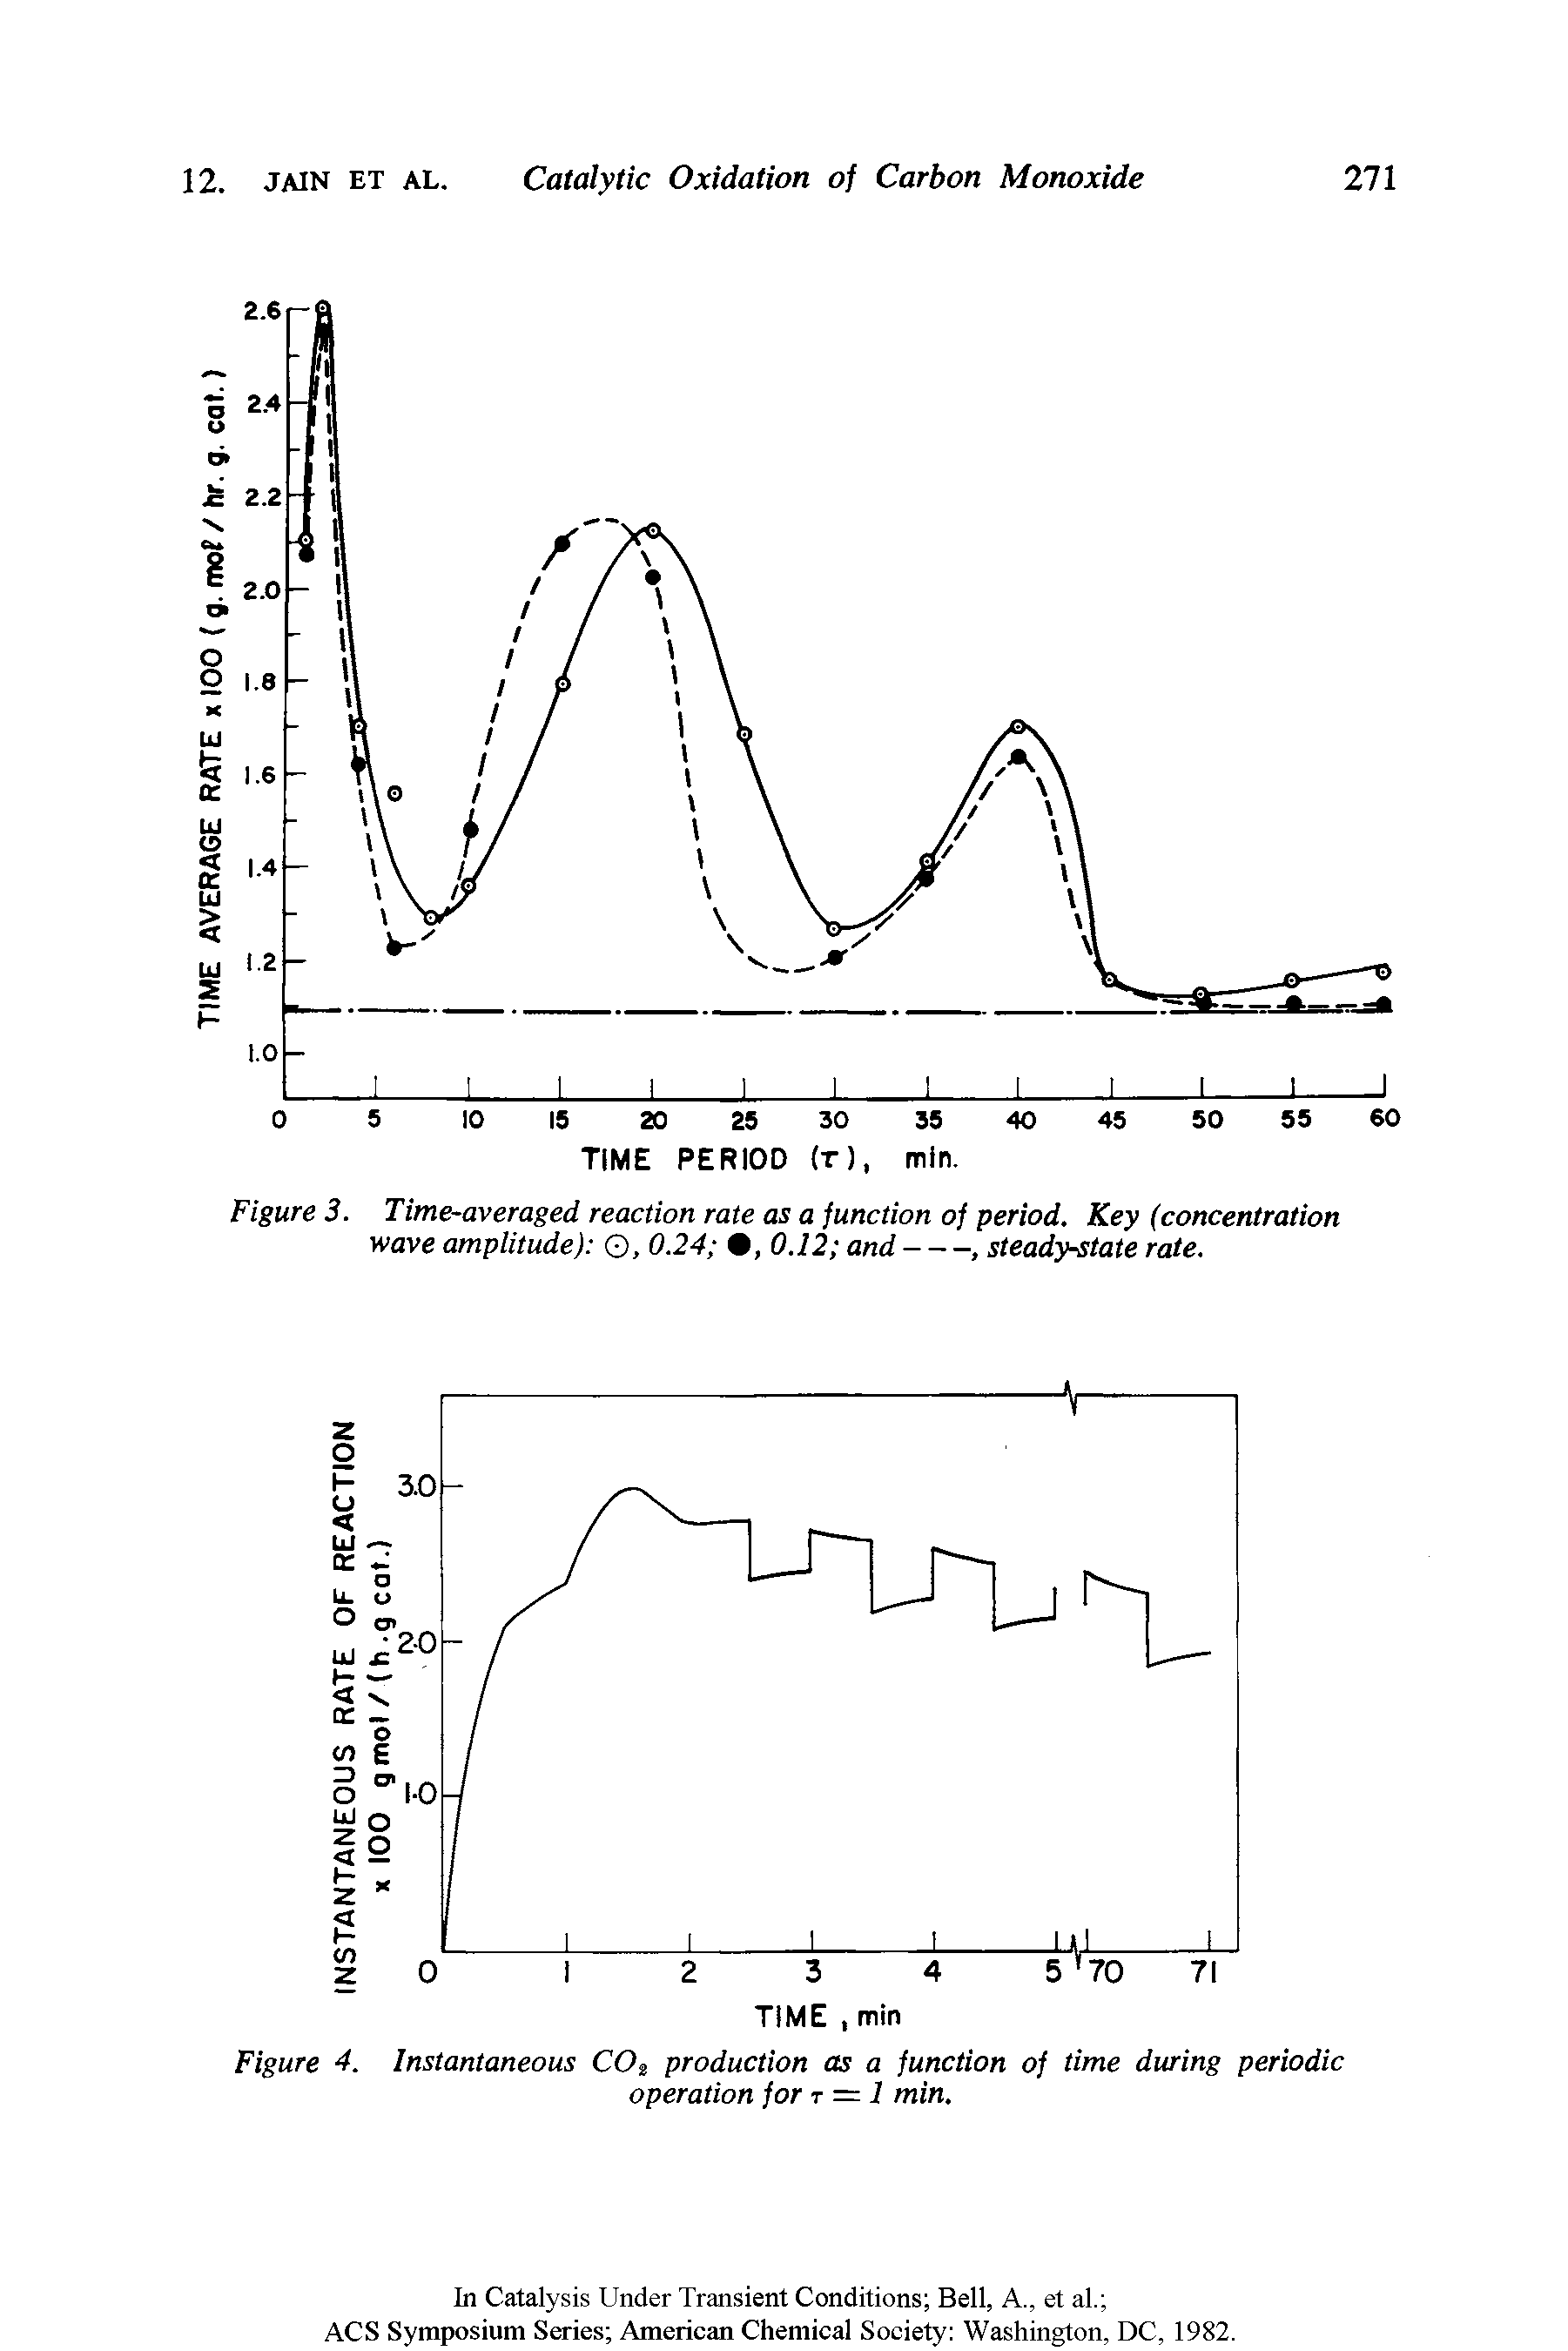 Figure 3. Time-averaged reaction rate as a function of period. Key (concentration wave amplitude) Q, 0.24 , 0.12 and-----------, steady-state rate.